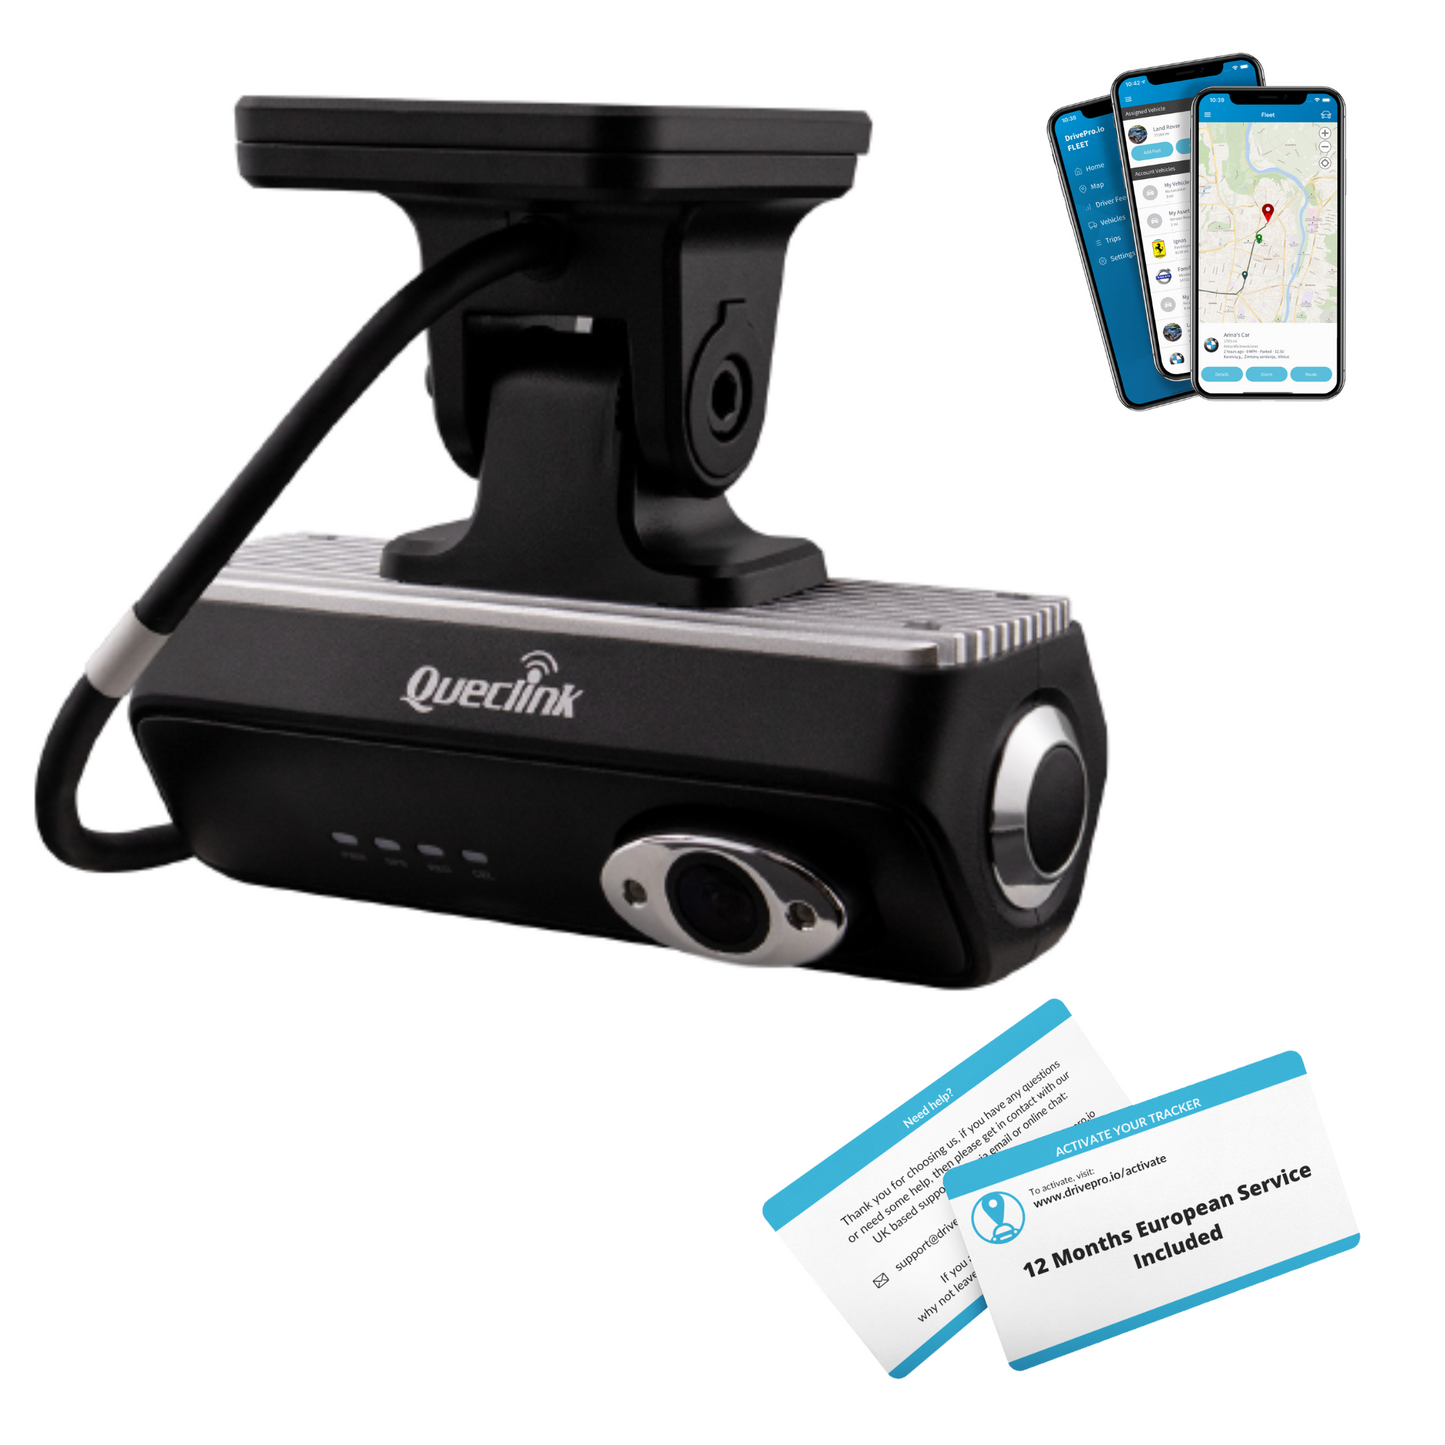 DrivePro.io Dual Camera Tracker CV100LG  - 12 Months Service Included